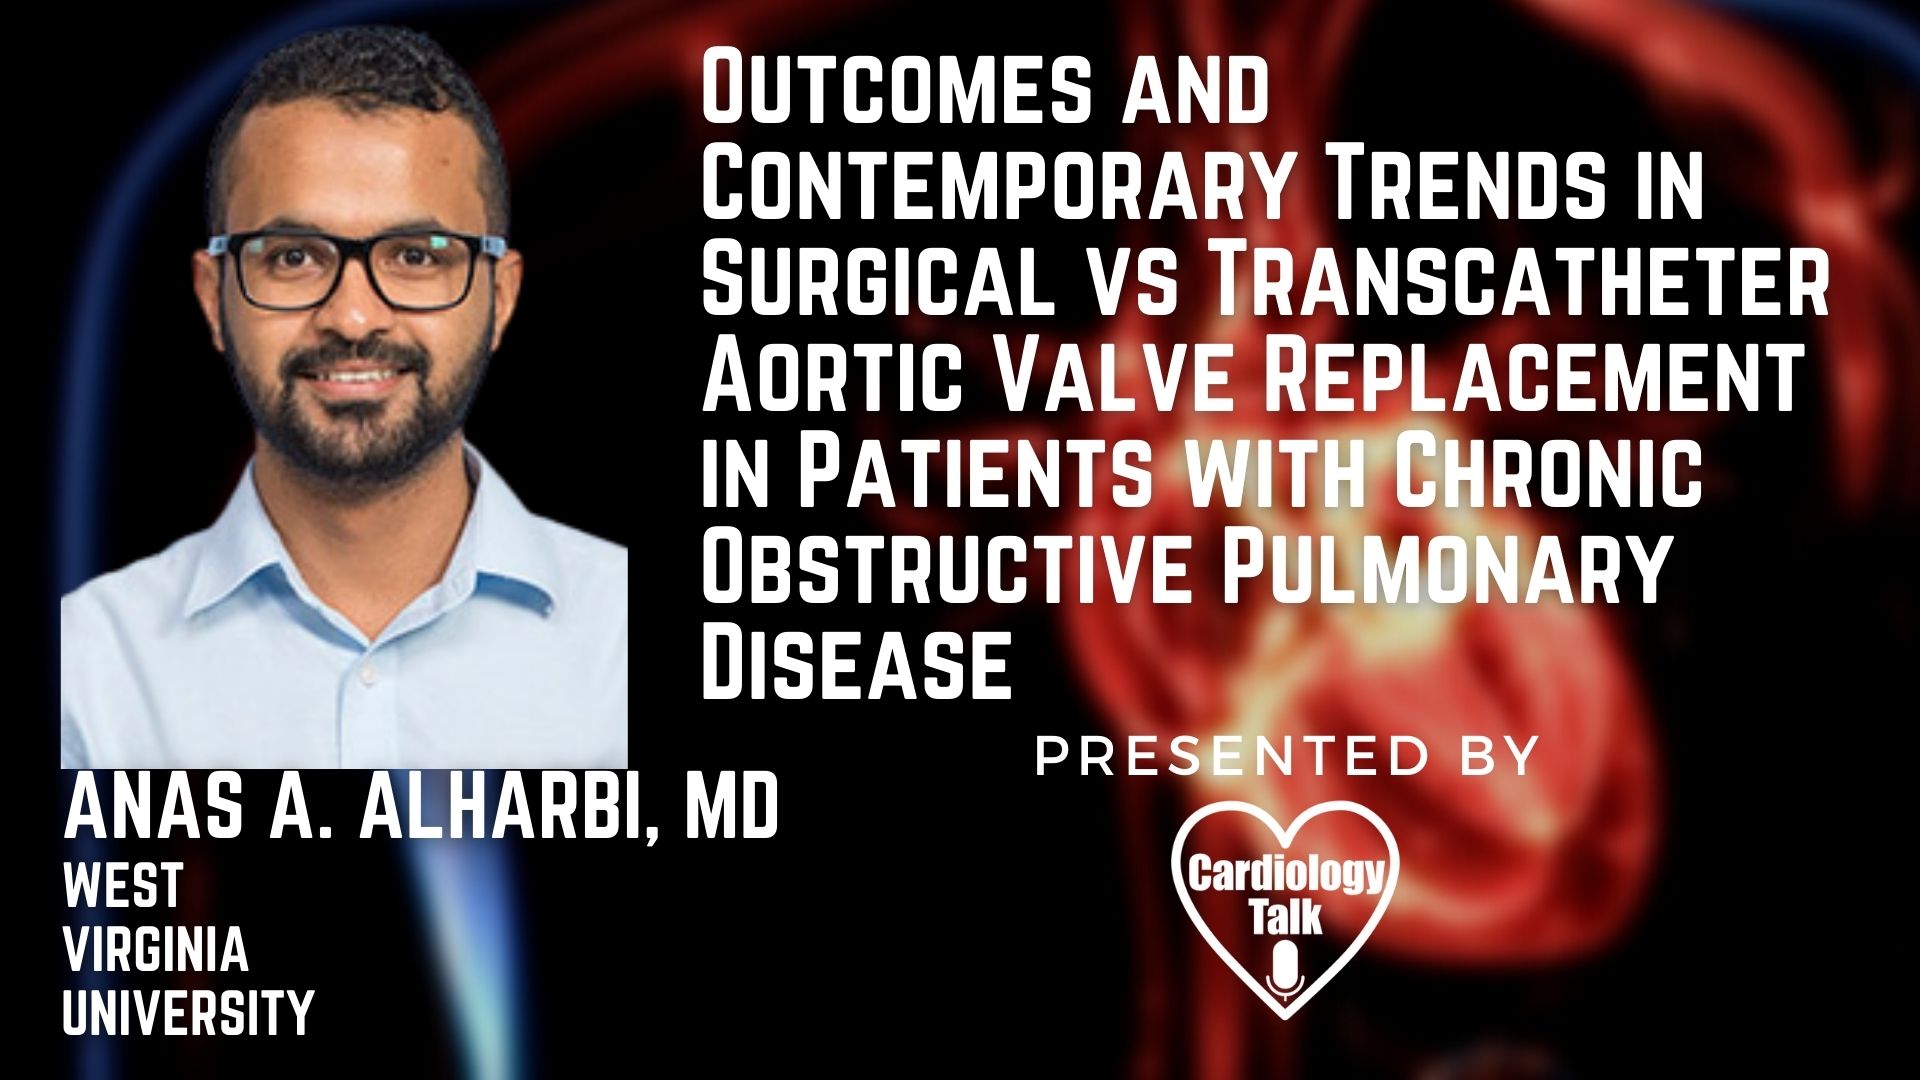 Anas A. Alharbi, MD @AnasAlharbi @wvumedicine @wvctsi #ChronicObstructivePulmonaryDisease #TAVR #Cardiology #Research Outcomes and Contemporary Trends in Surgical vs TAVR in Pts with COPD